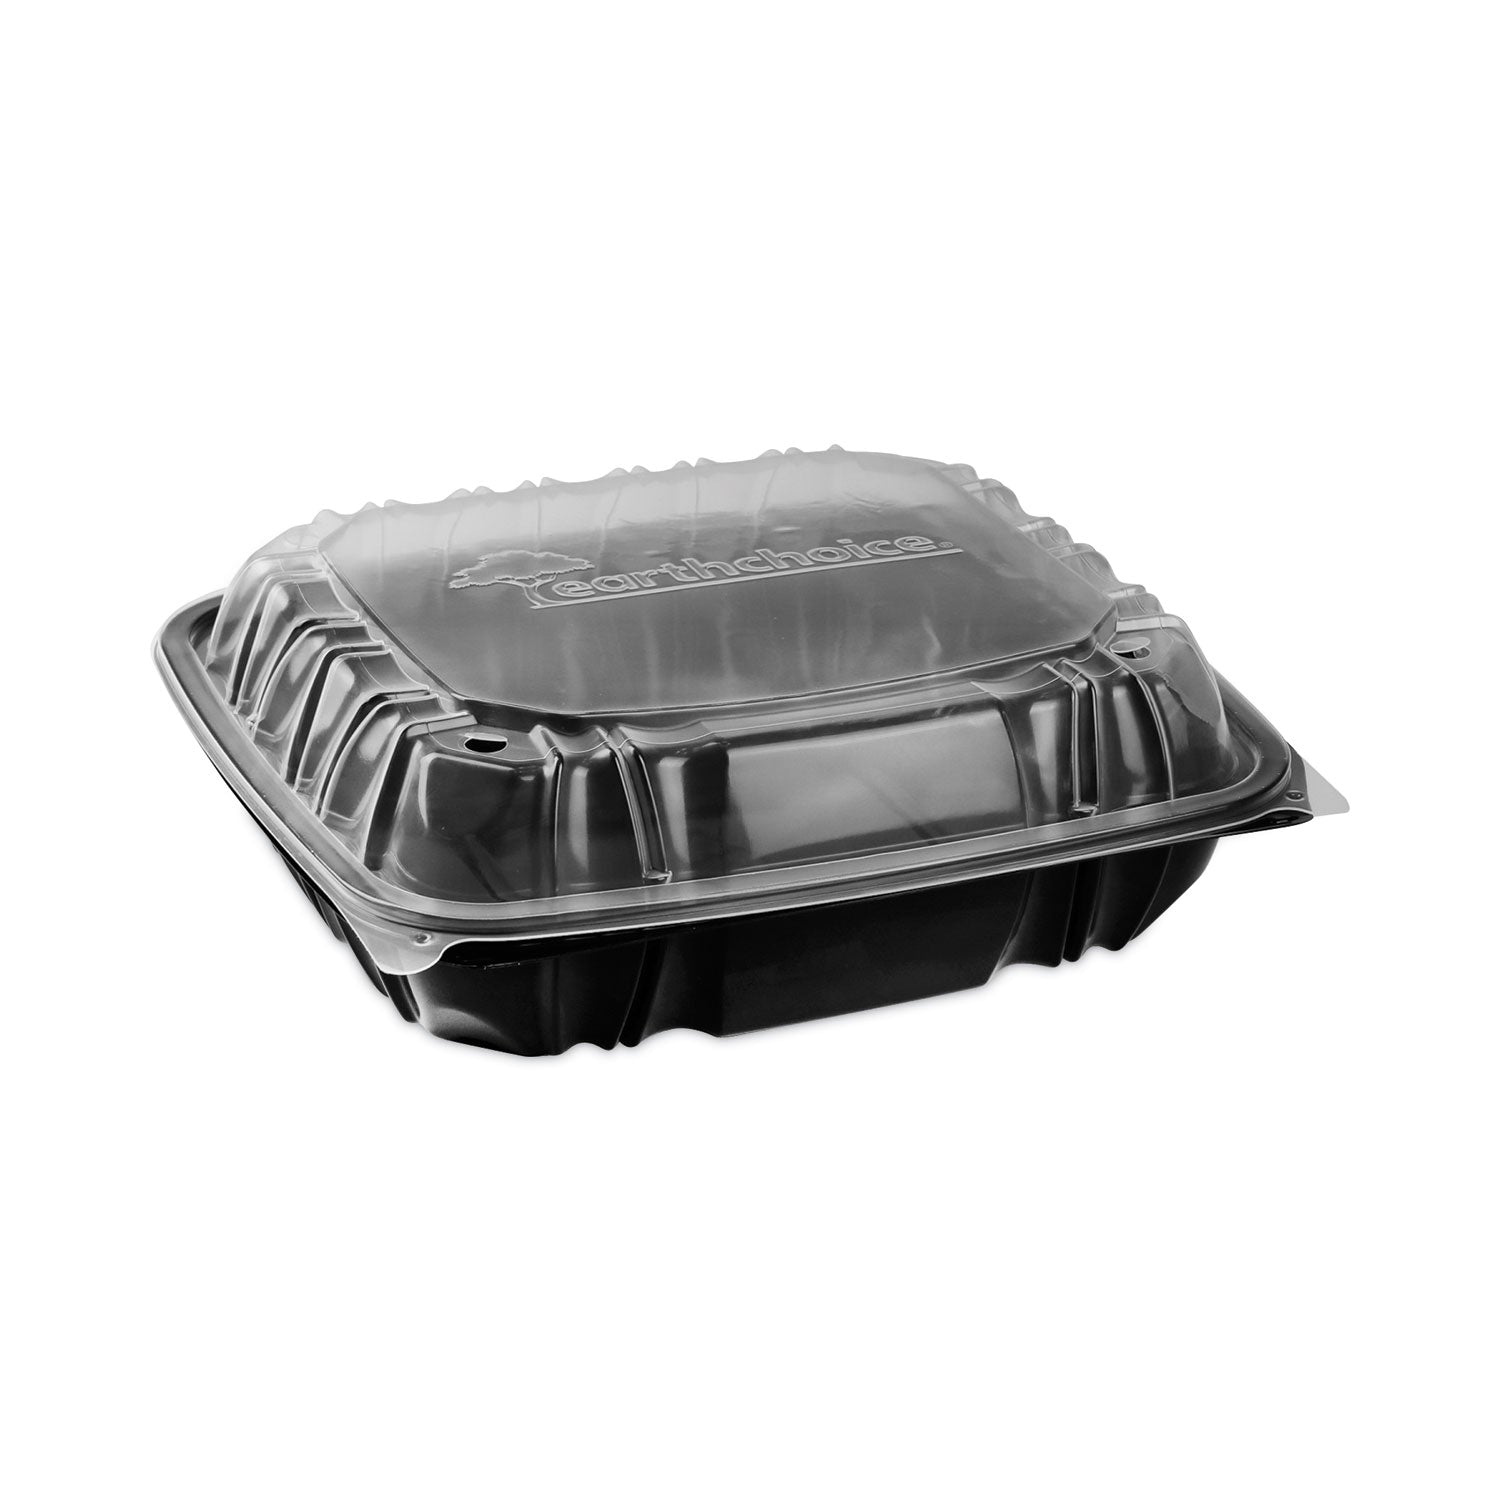 earthchoice-vented-dual-color-microwavable-hinged-lid-container-3-compartment-34oz-105x95x3-black-clear-plastic-132-ct_pctdc109310b000 - 1